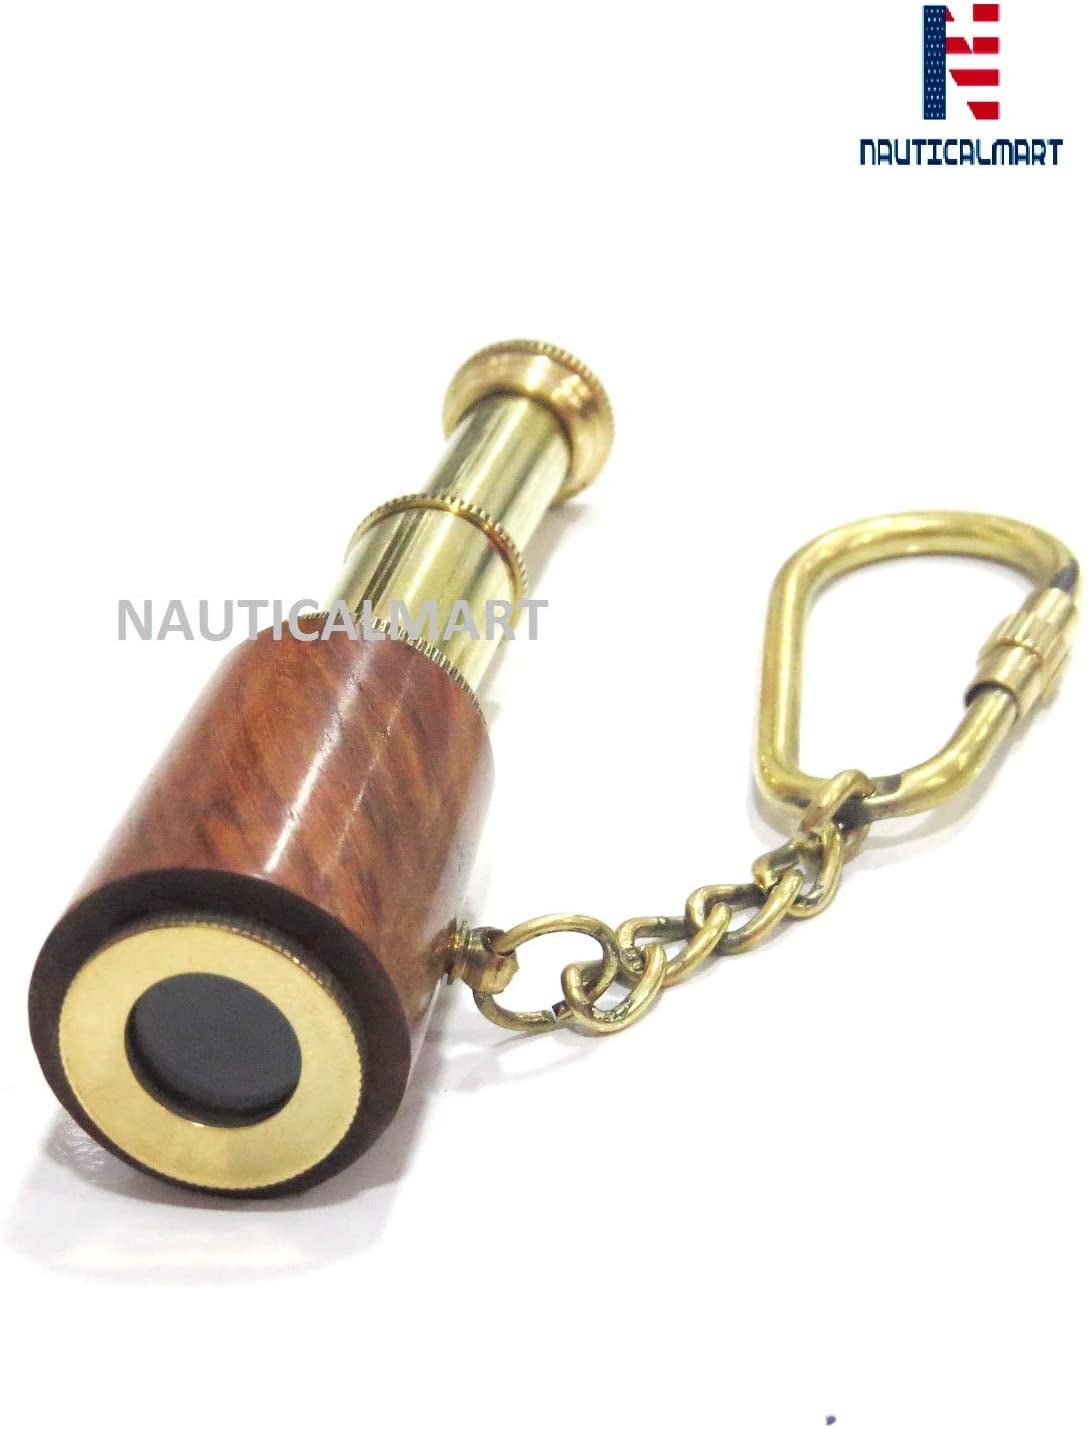 Solid Brass Miniature Functional Collapsible Telescope Keychain Spyglass Scope 